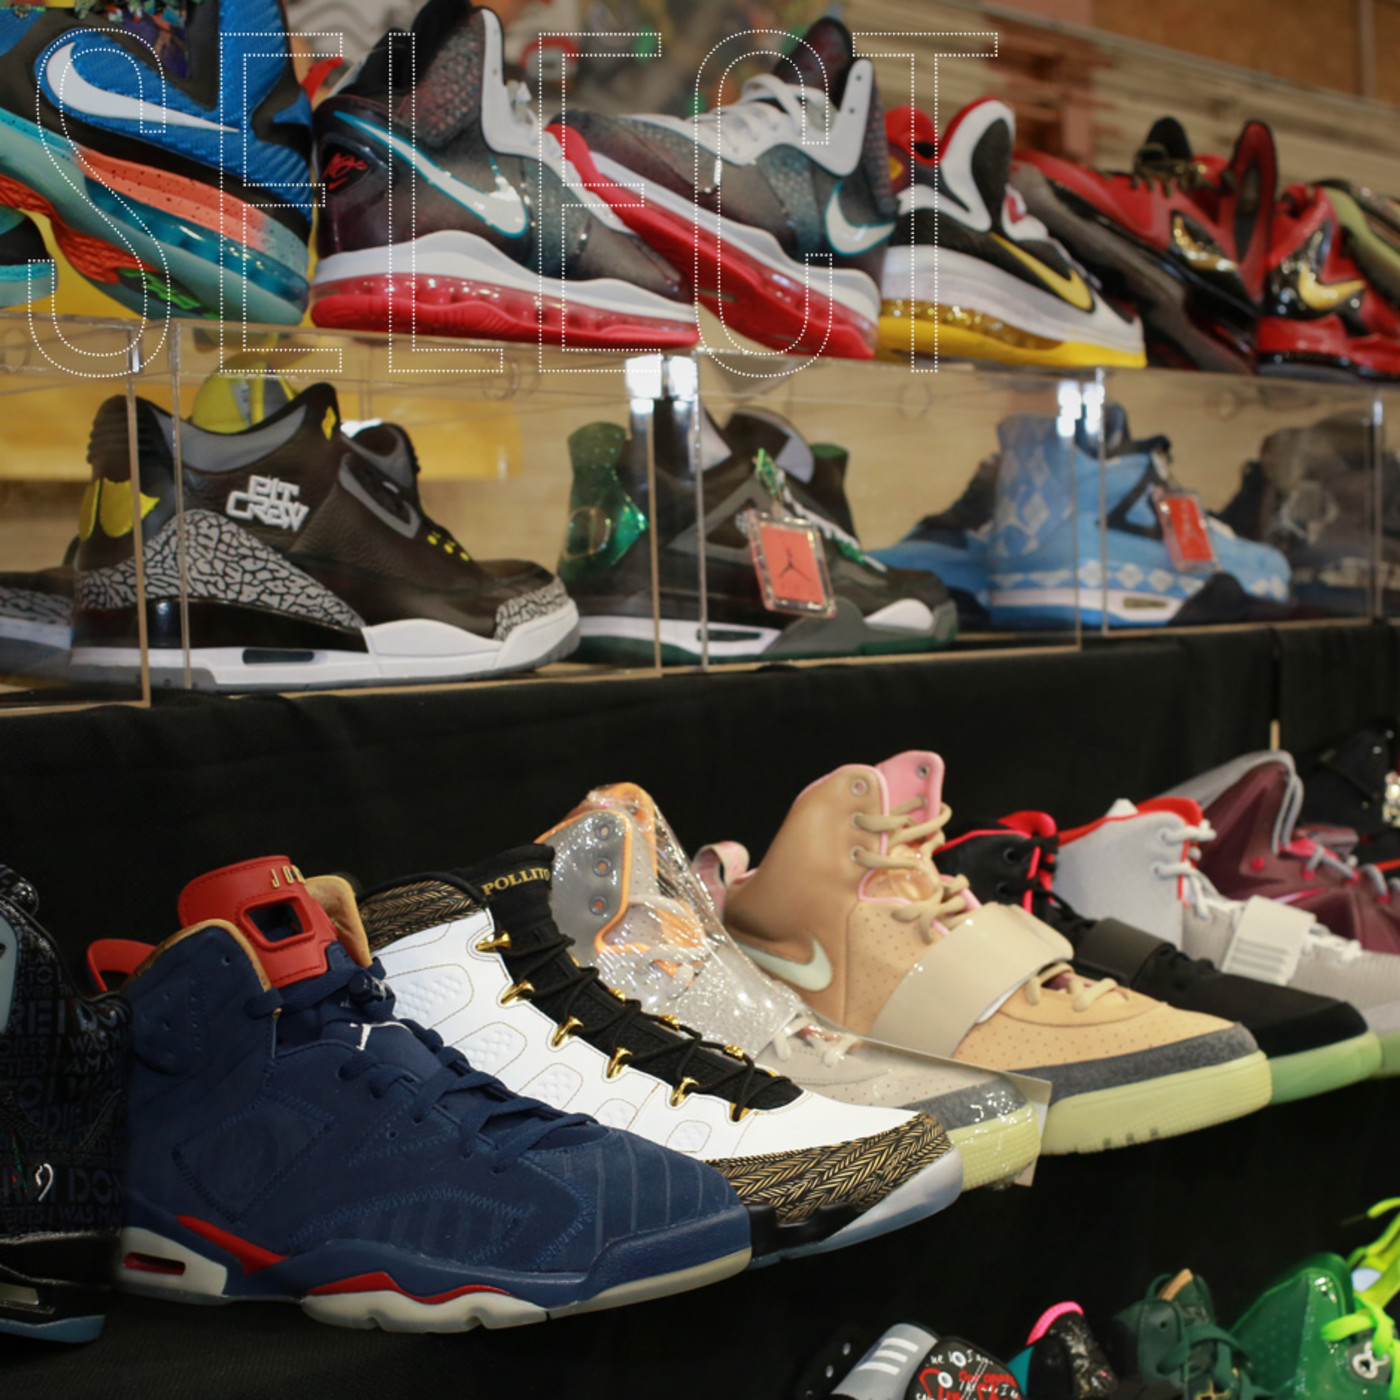 Sneaker News Digs Into Another Impressive Sneaker Collection | Complex